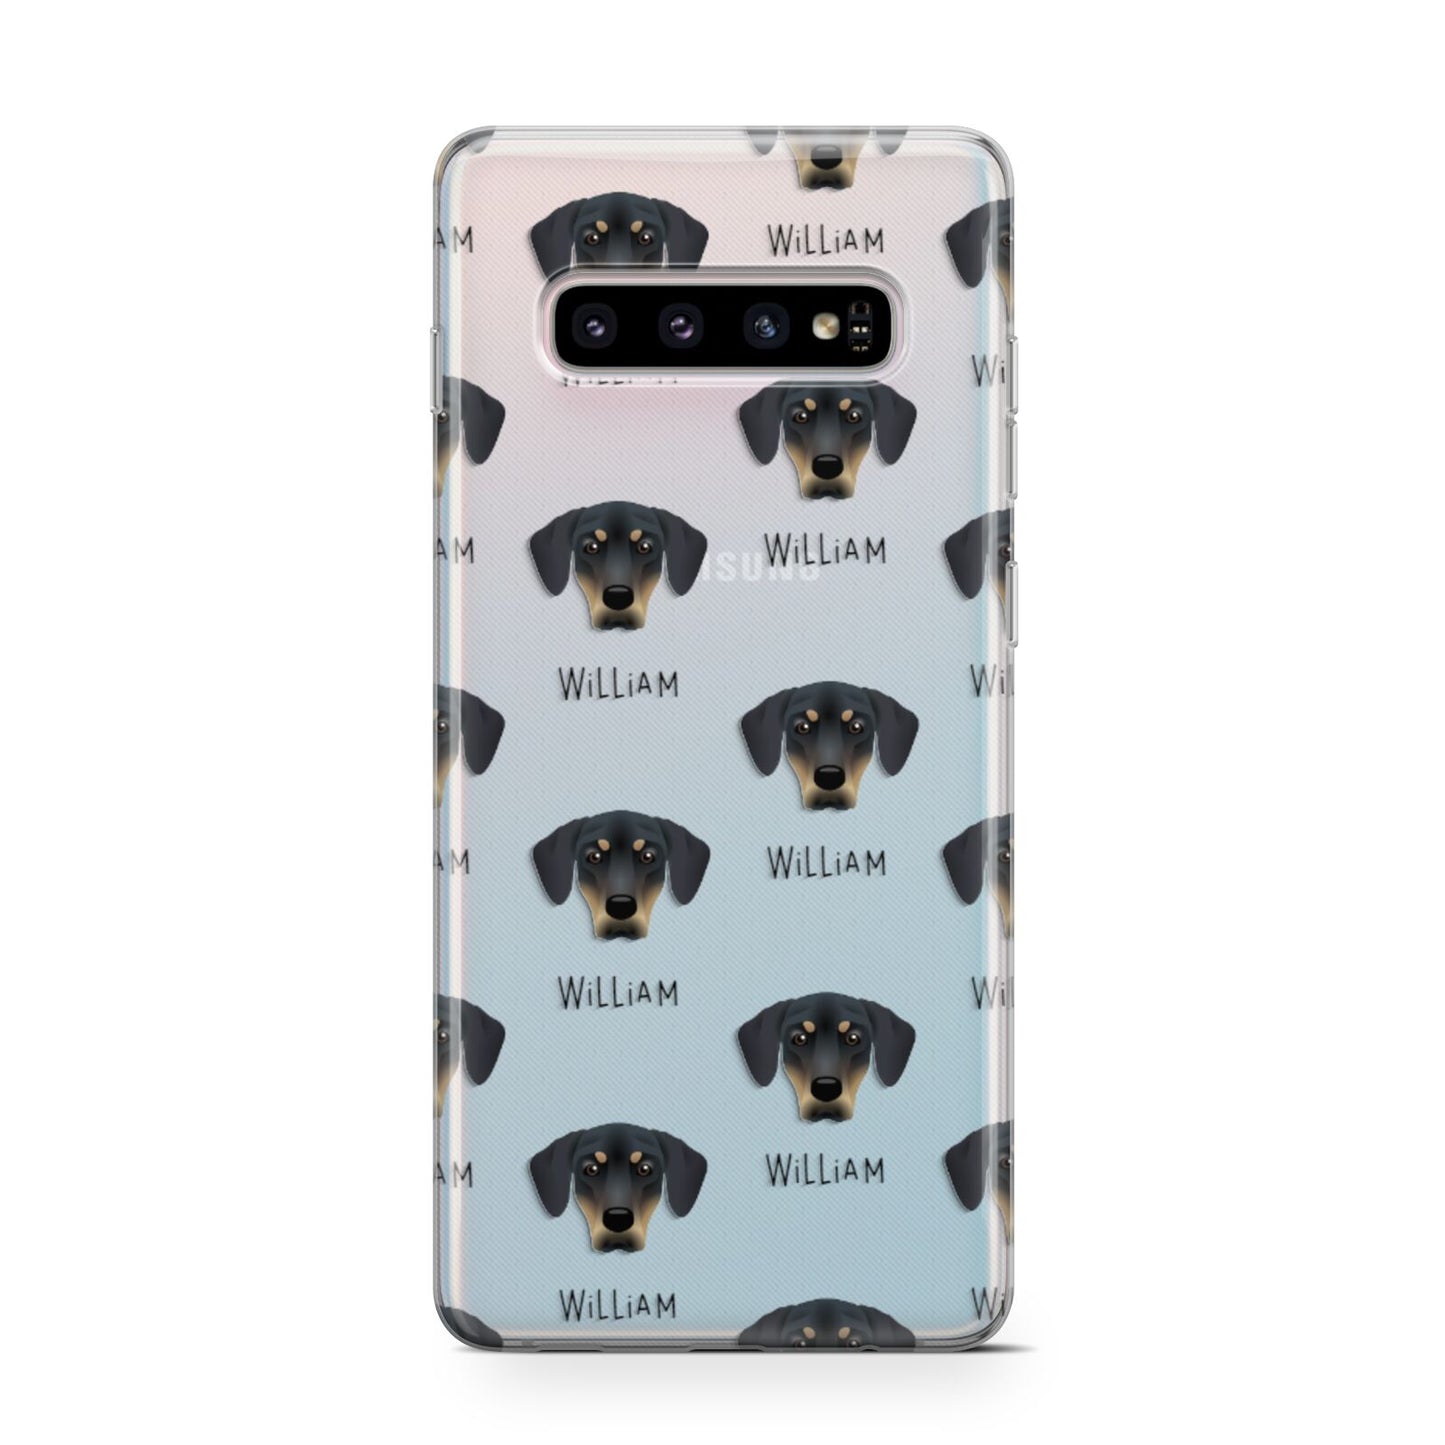 New Zealand Huntaway Icon with Name Samsung Galaxy S10 Case